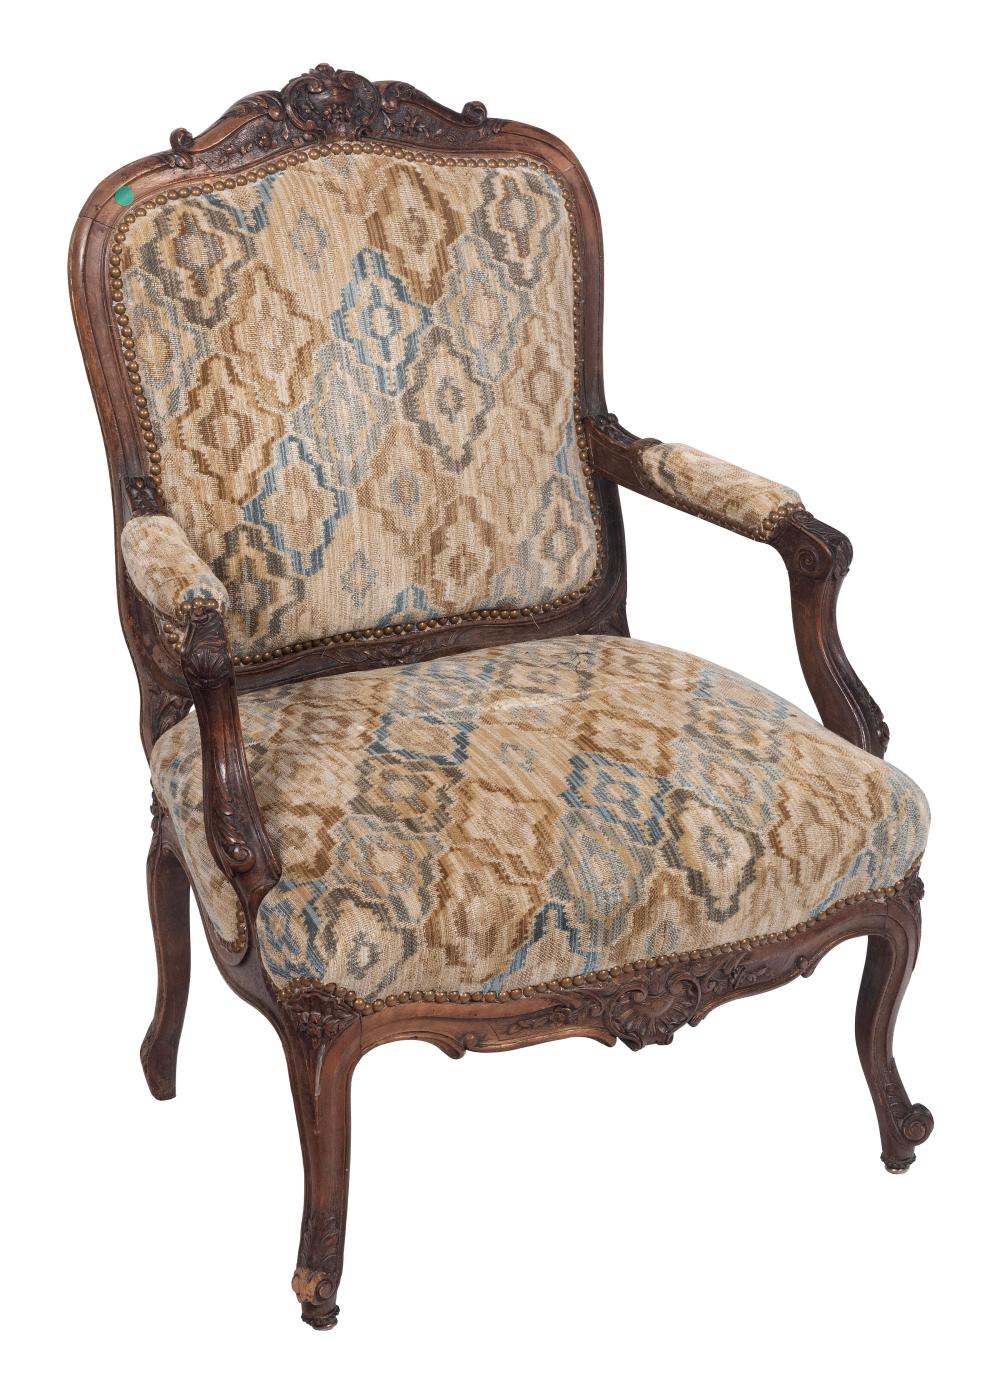 FRENCH-STYLE ARMCHAIR LATE 19TH